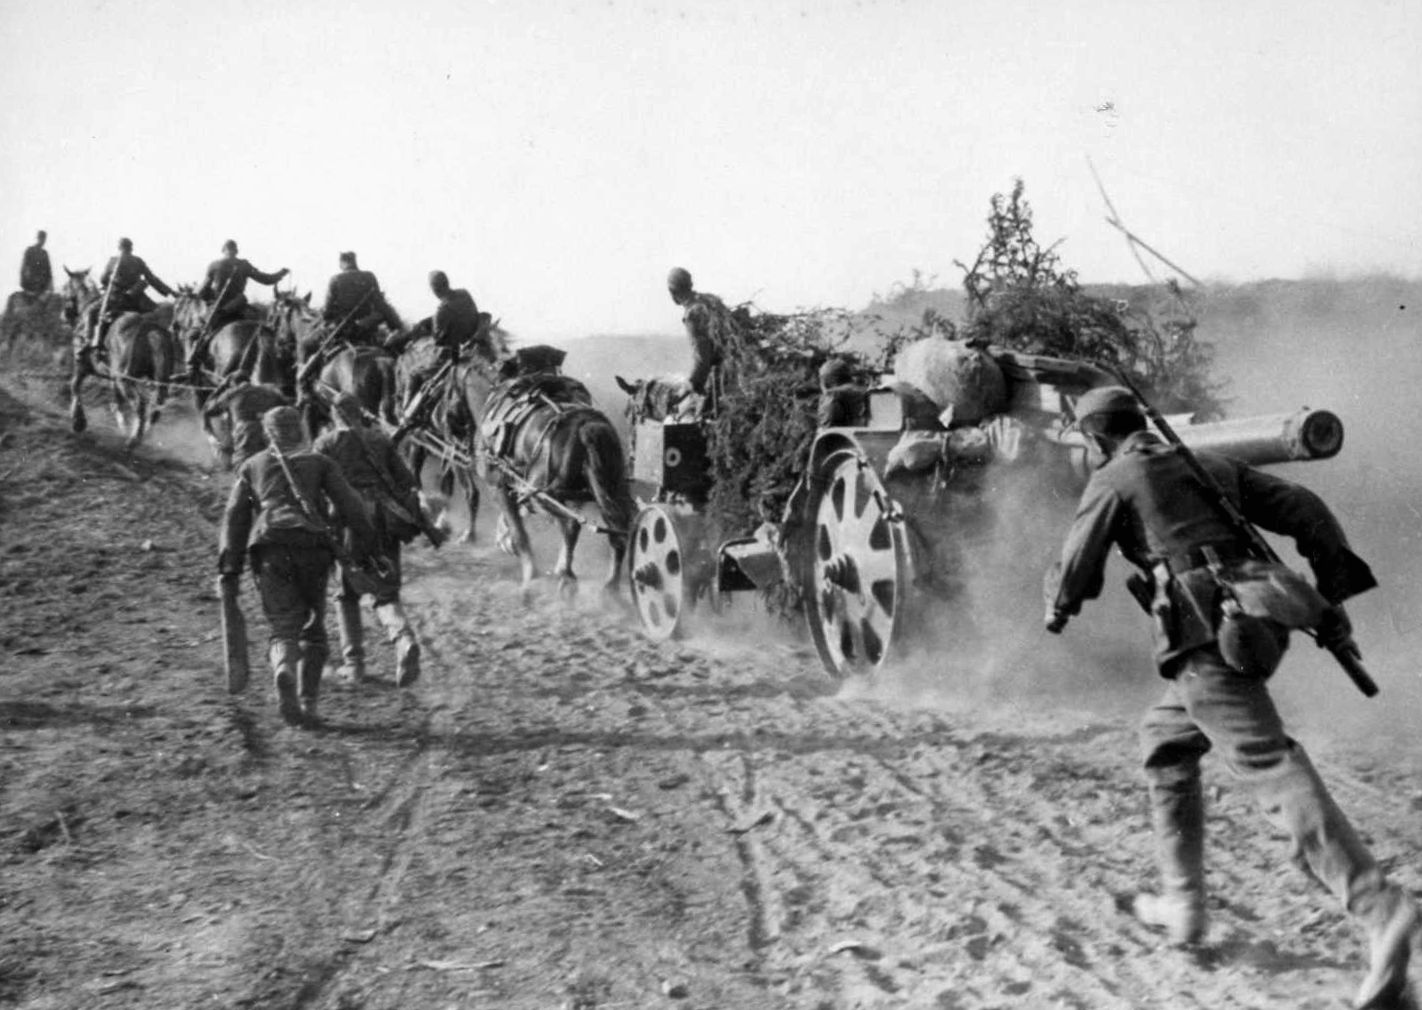 A team of horses strains under the weight of a heavy artillery piece, which produces a cloud of choking dust as German soldiers advance alongside. Note the makeshift attempt to camouflage the gun.